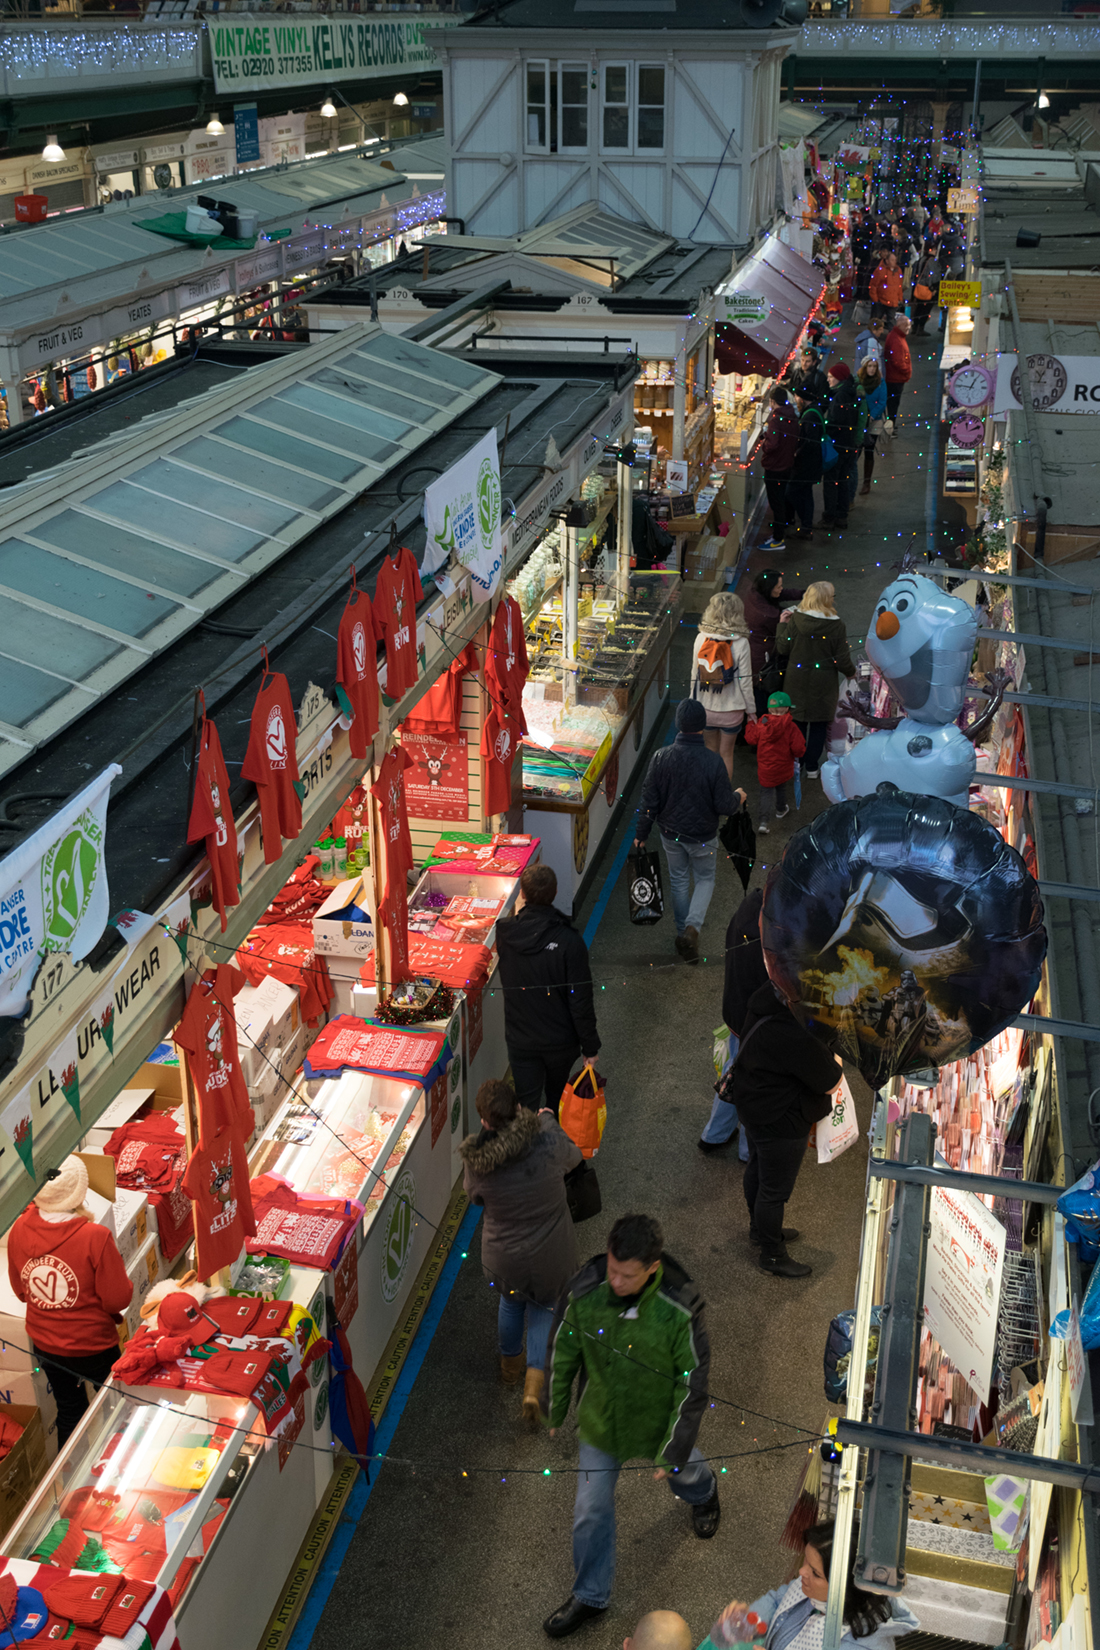 The ground floor has four aisles with stalls on both sides